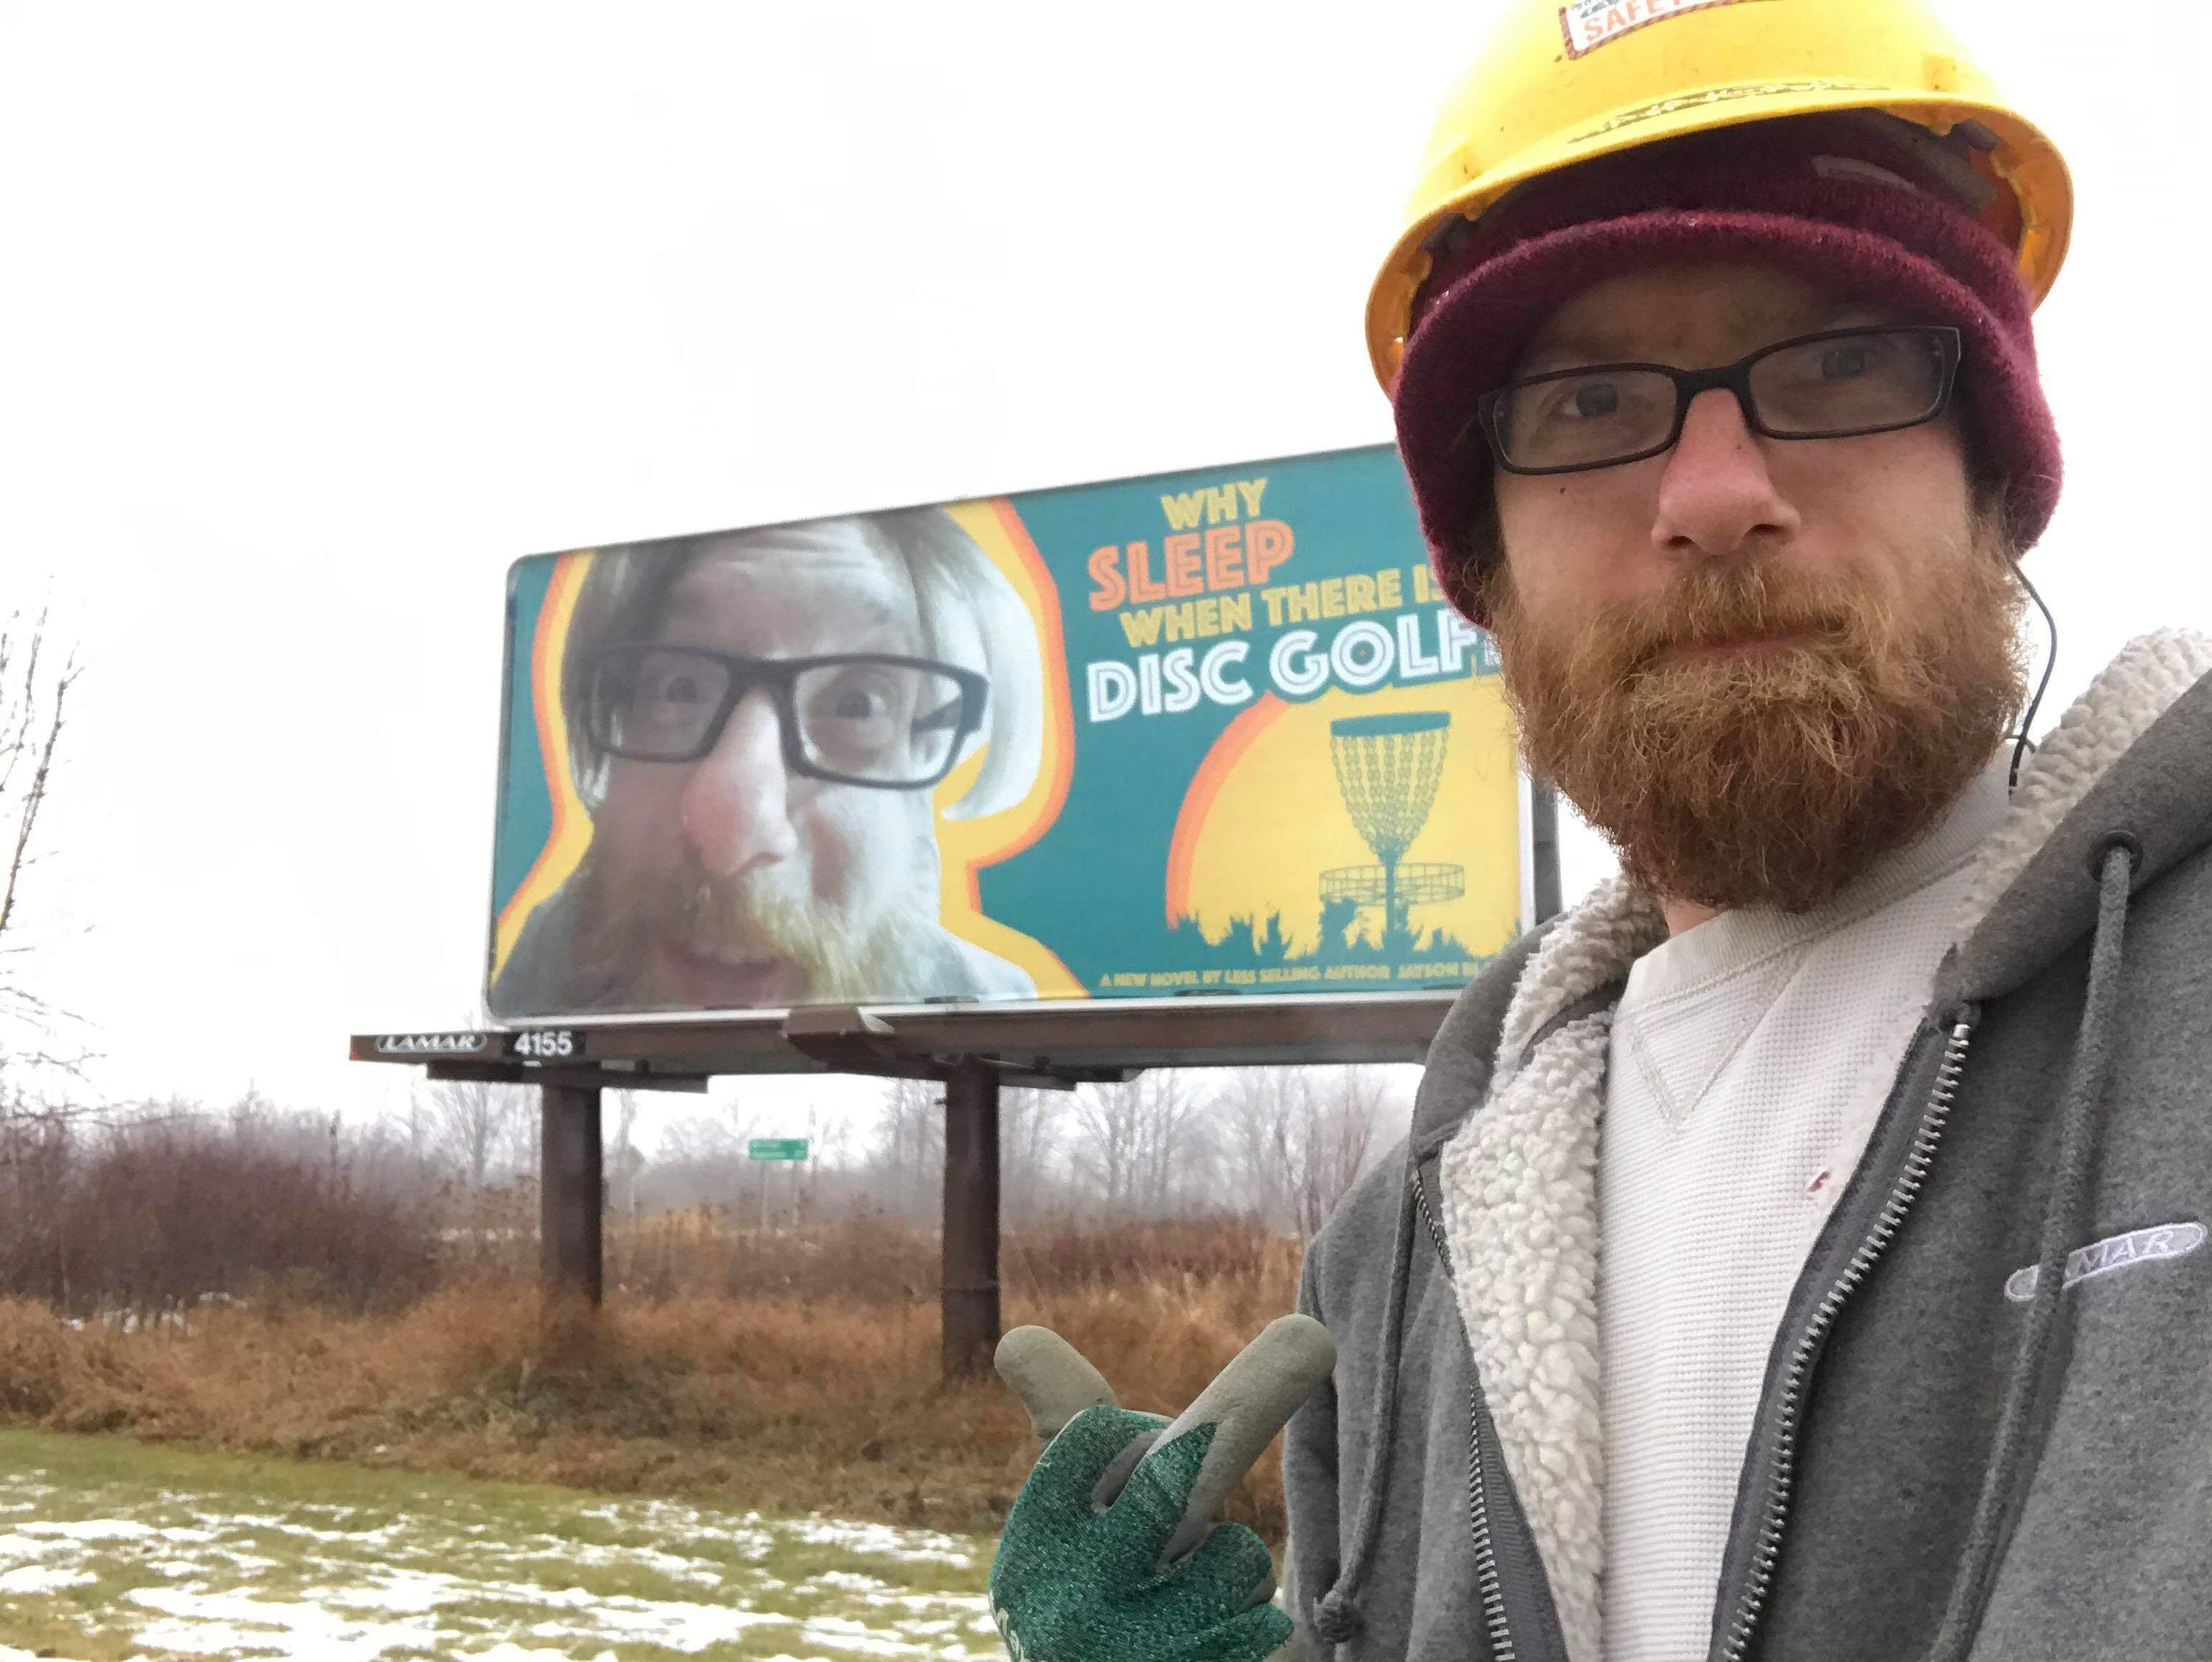 My buddy posts billboards for a living and is an avid disc golfer, so a bunch of local discers pooled together money for this billboard. He had no idea until he finished putting it up.